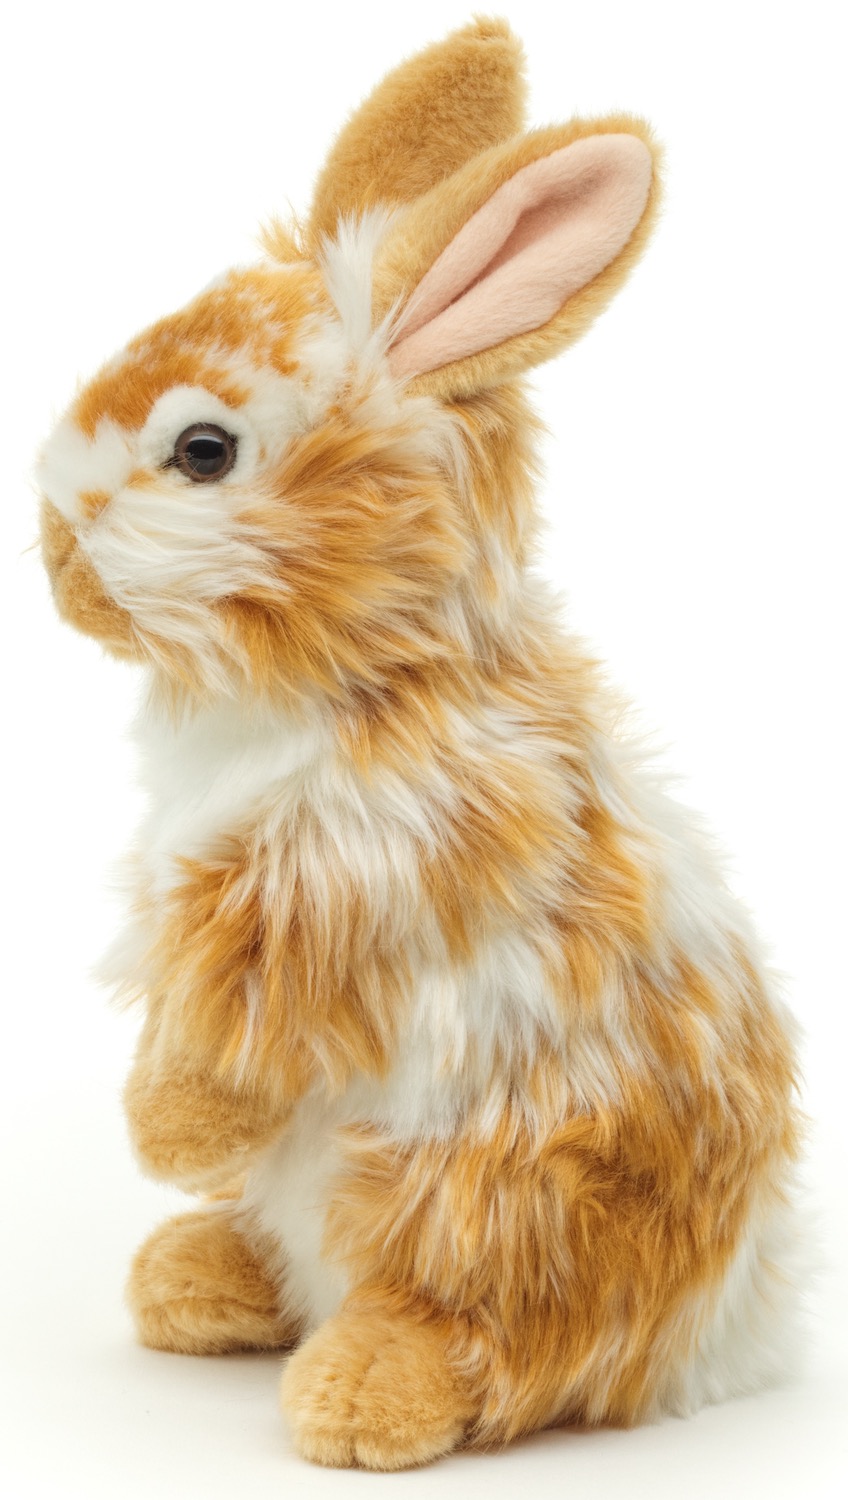 Lion head rabbit with erect ears - standing - gold and white pied 